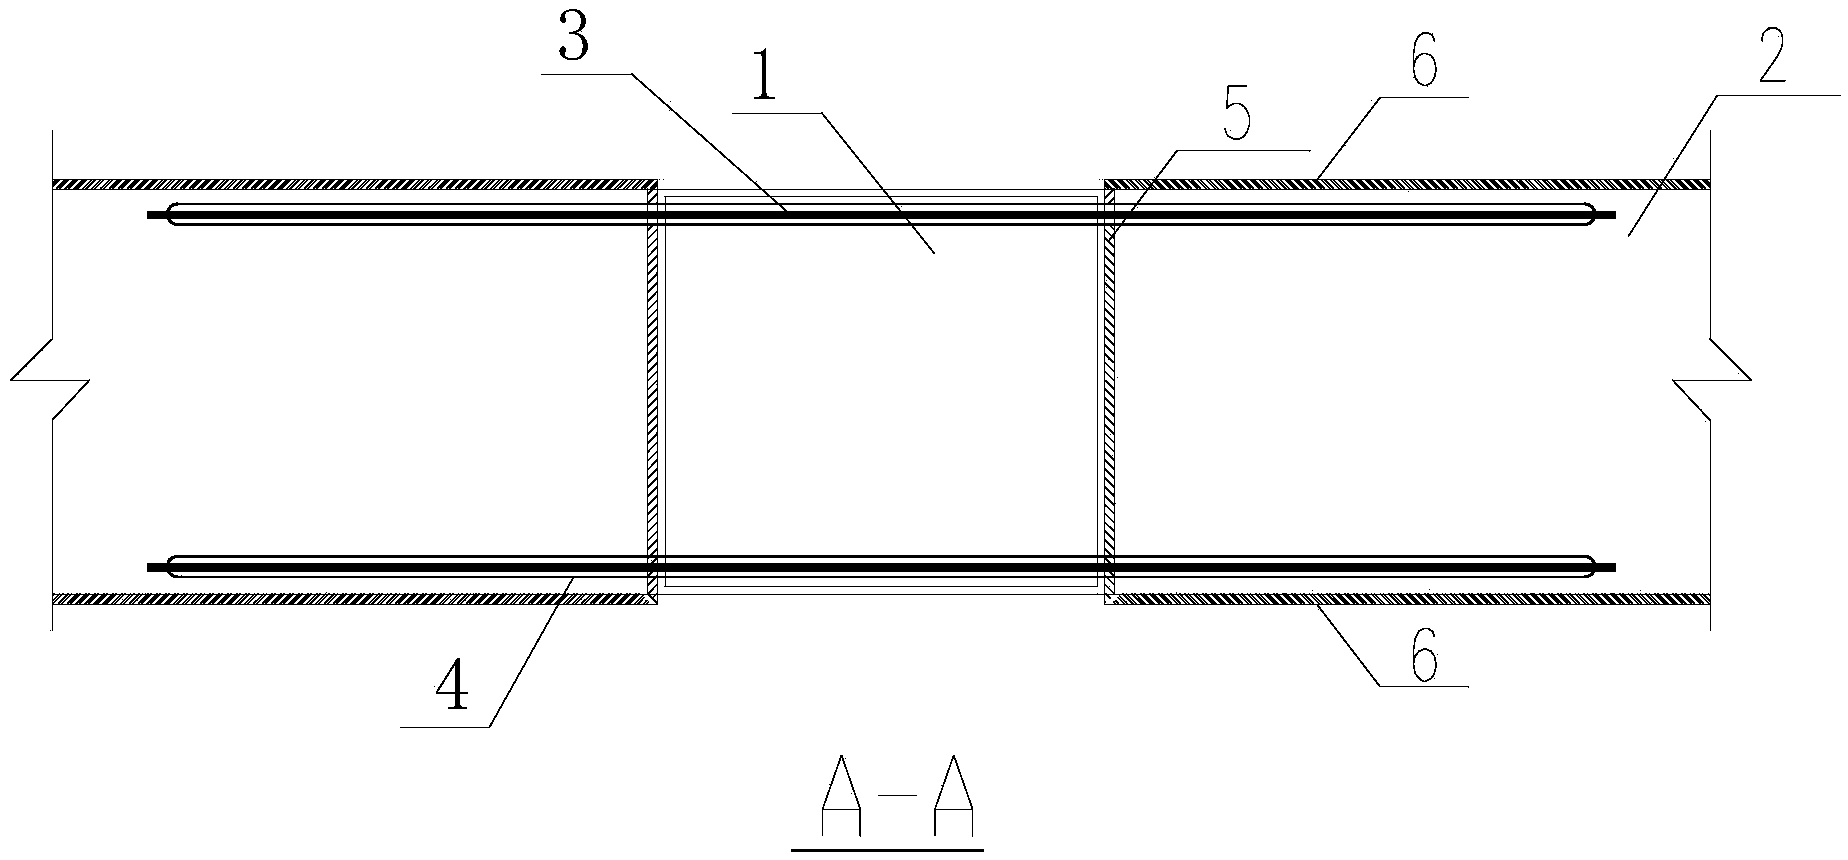 Node for connecting prefabricated concrete beam with rectangular steel tube concrete column through unbonded prestressed ribs